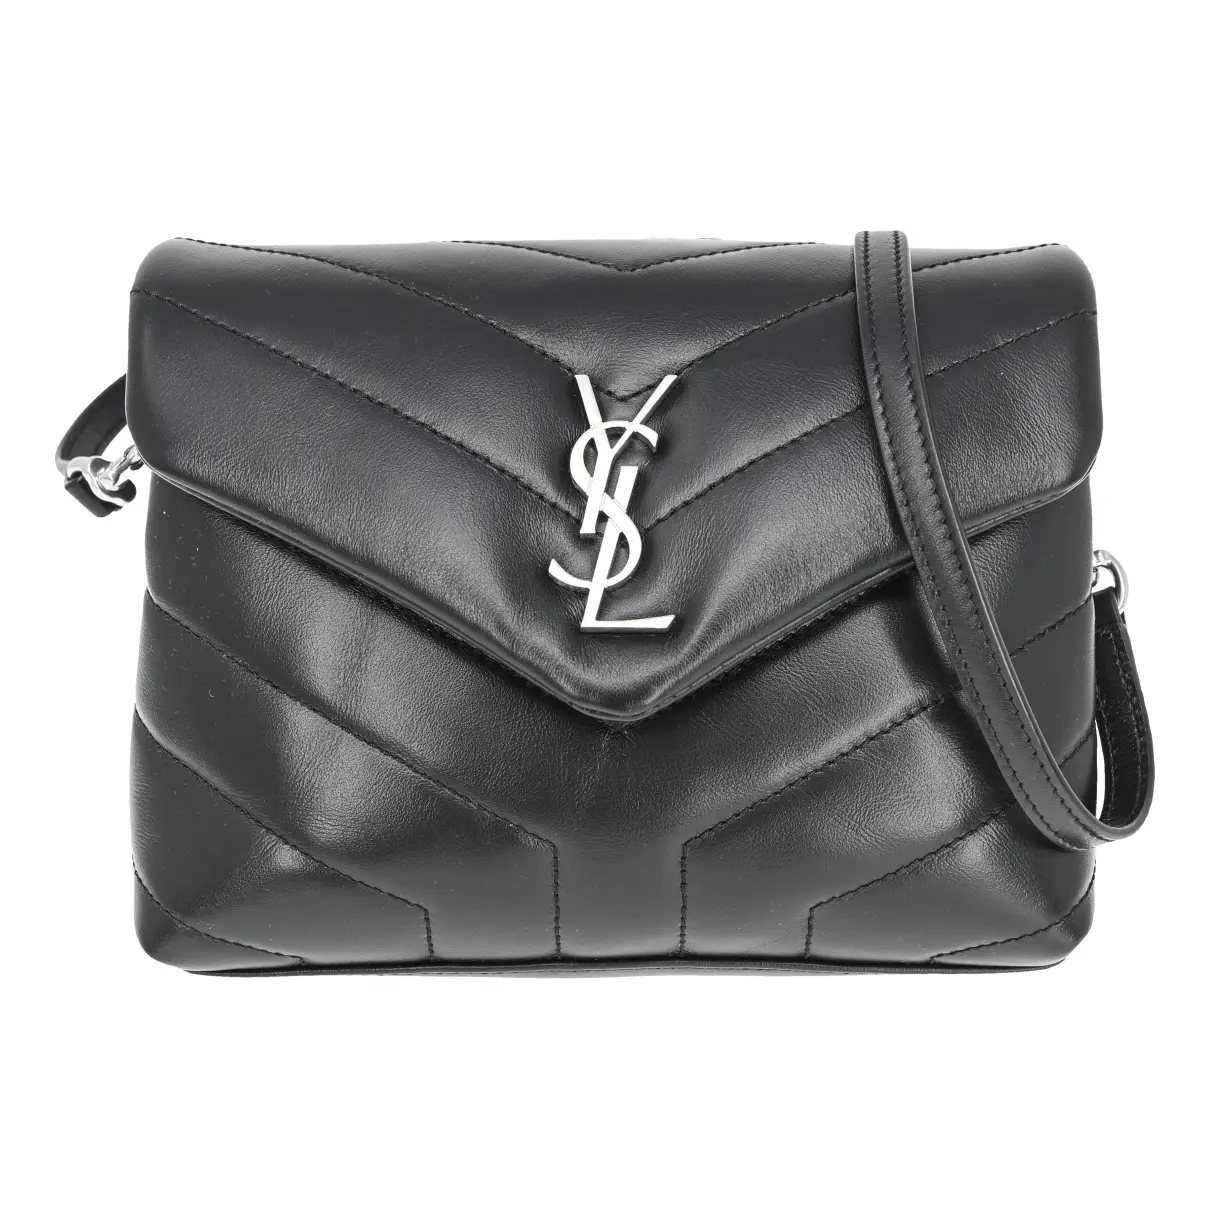 Loulou leather crossbody bag